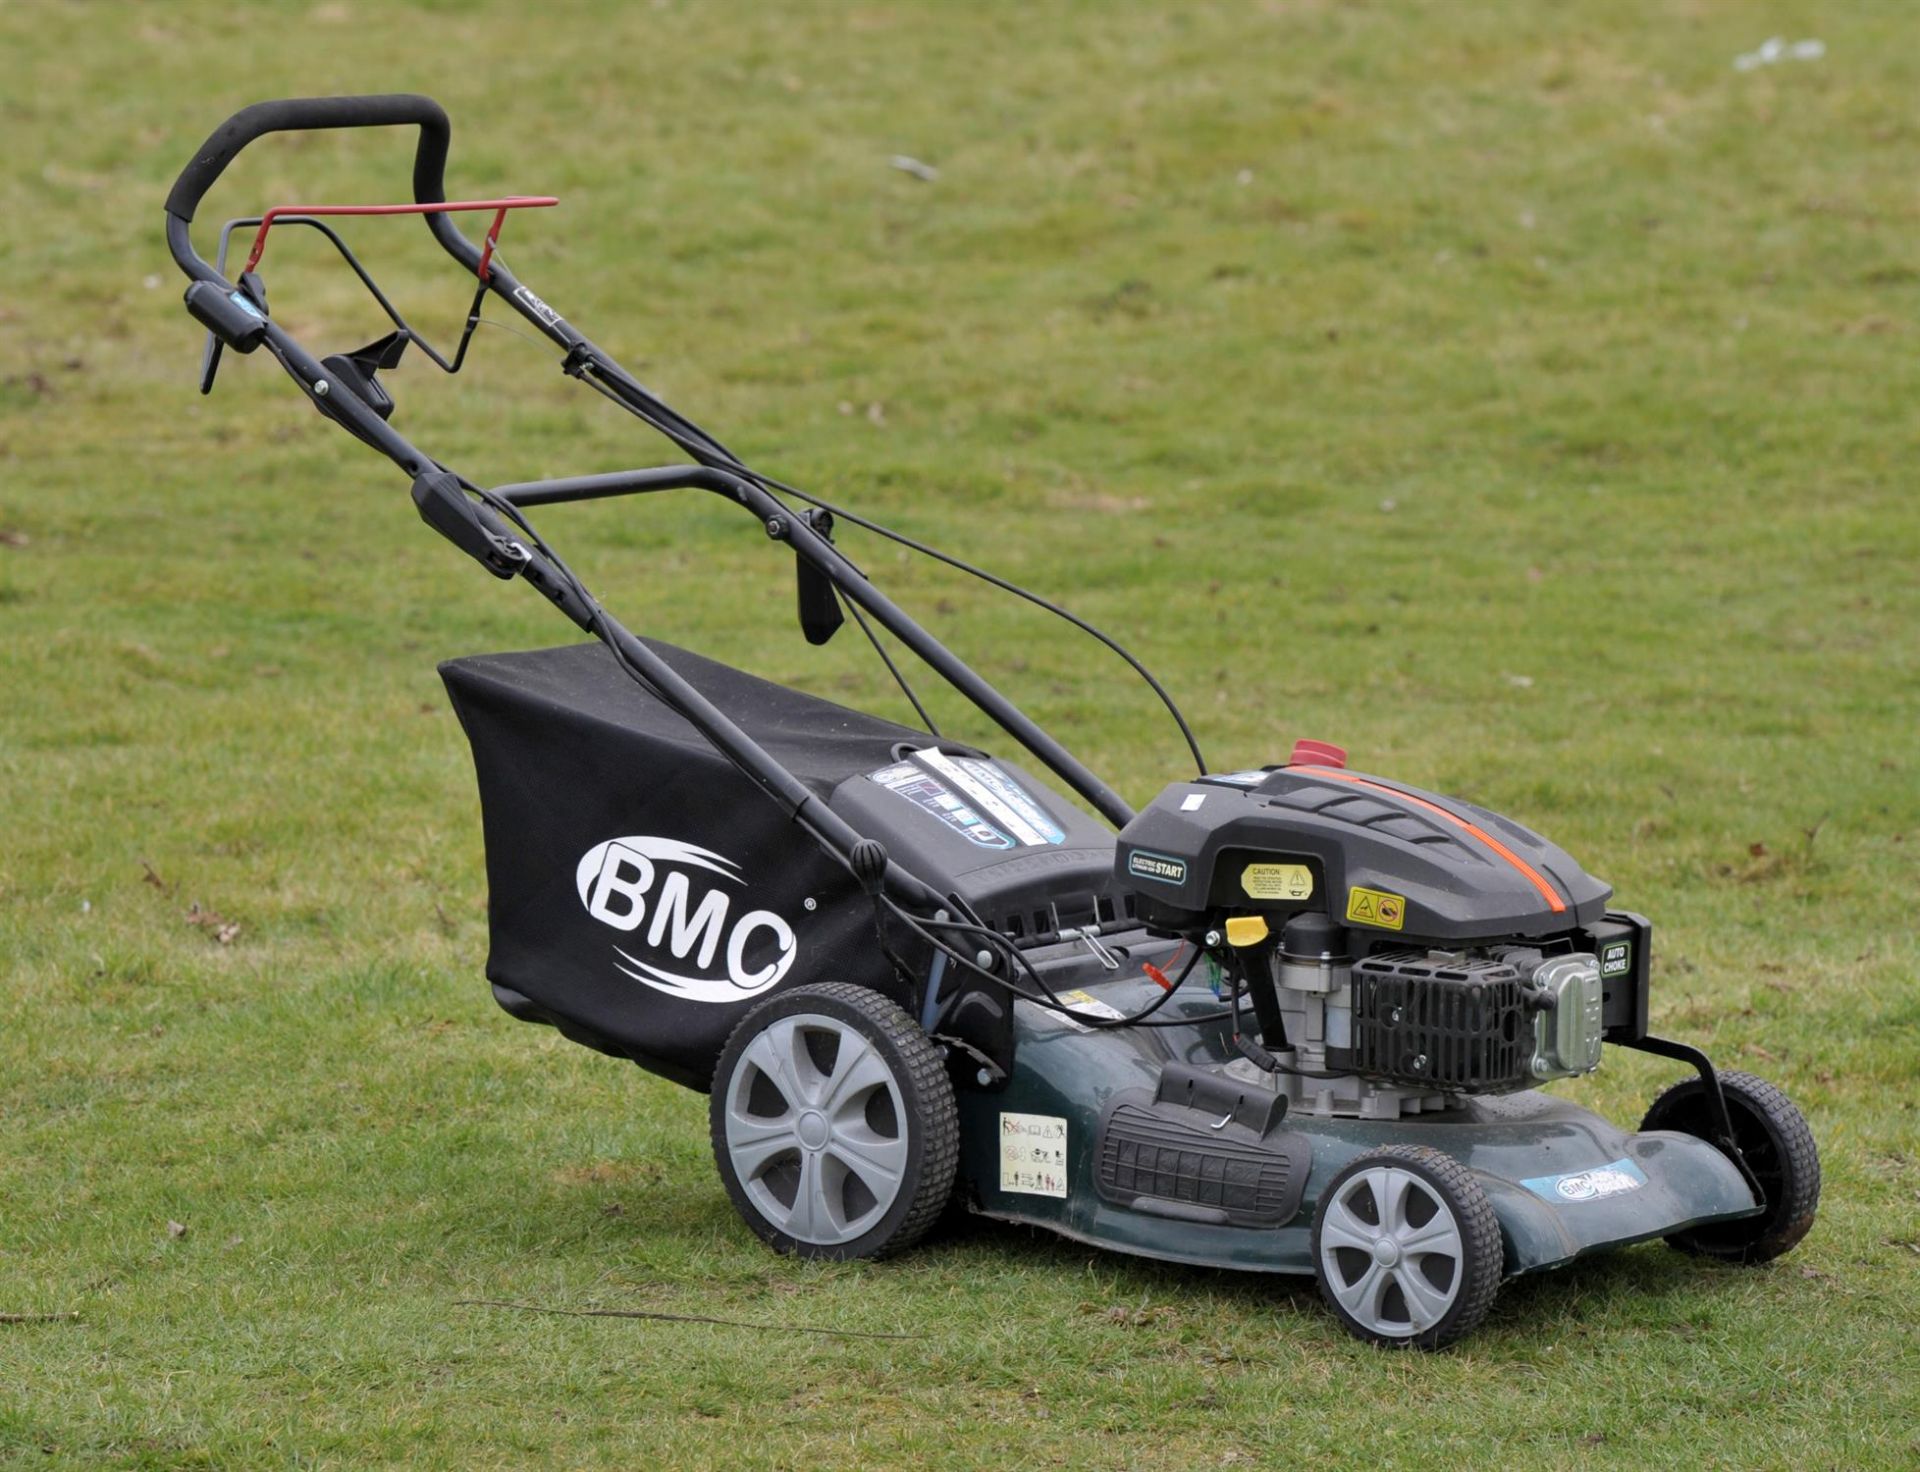 Wolf 5.5 HP Engine, two blade Lawn Racer Mower. PLEASE NOTE BUYERS PREMIUM AT THE STANDARD IN - Image 2 of 9